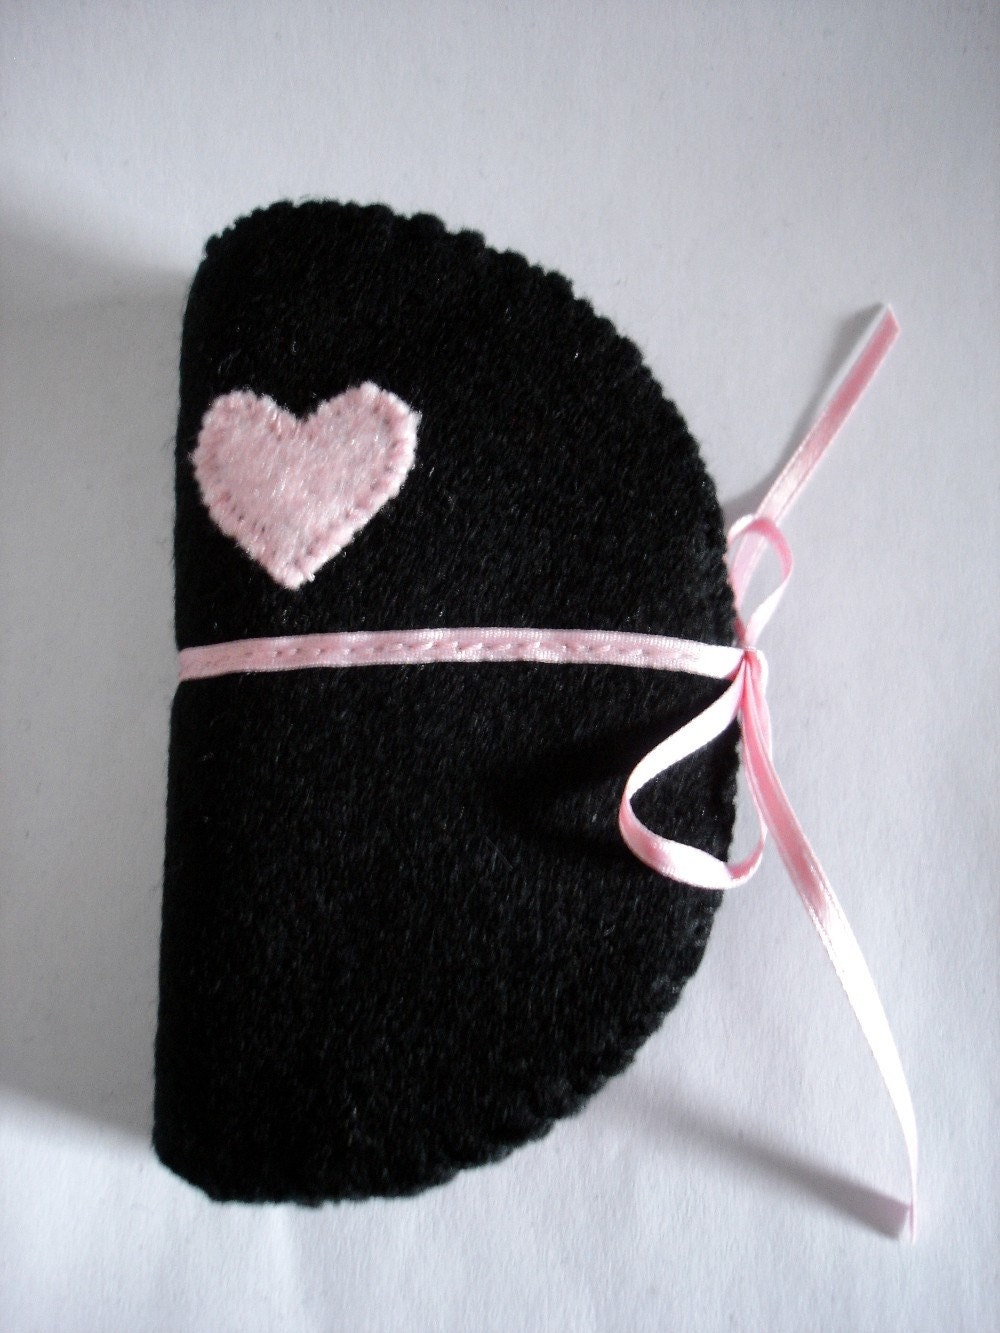 Black Needle Case with Pale Pink Heart Embroidery